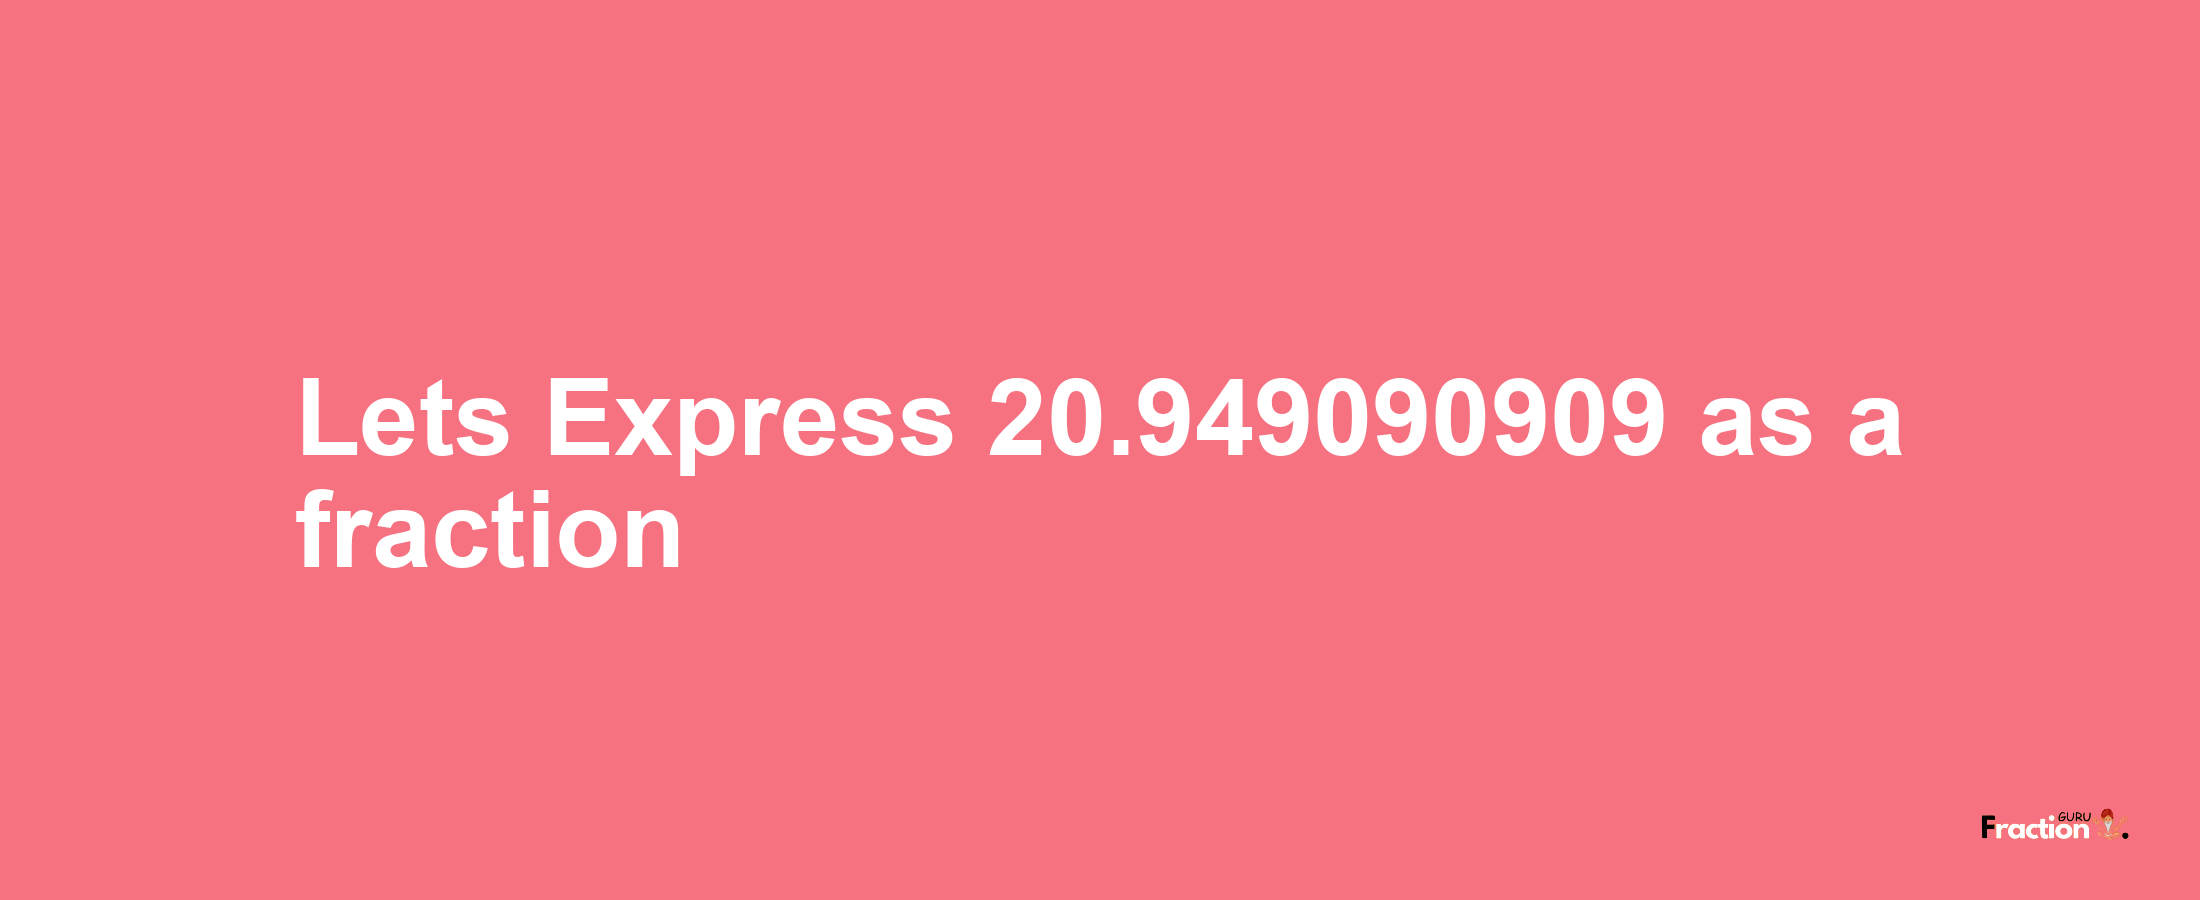 Lets Express 20.949090909 as afraction